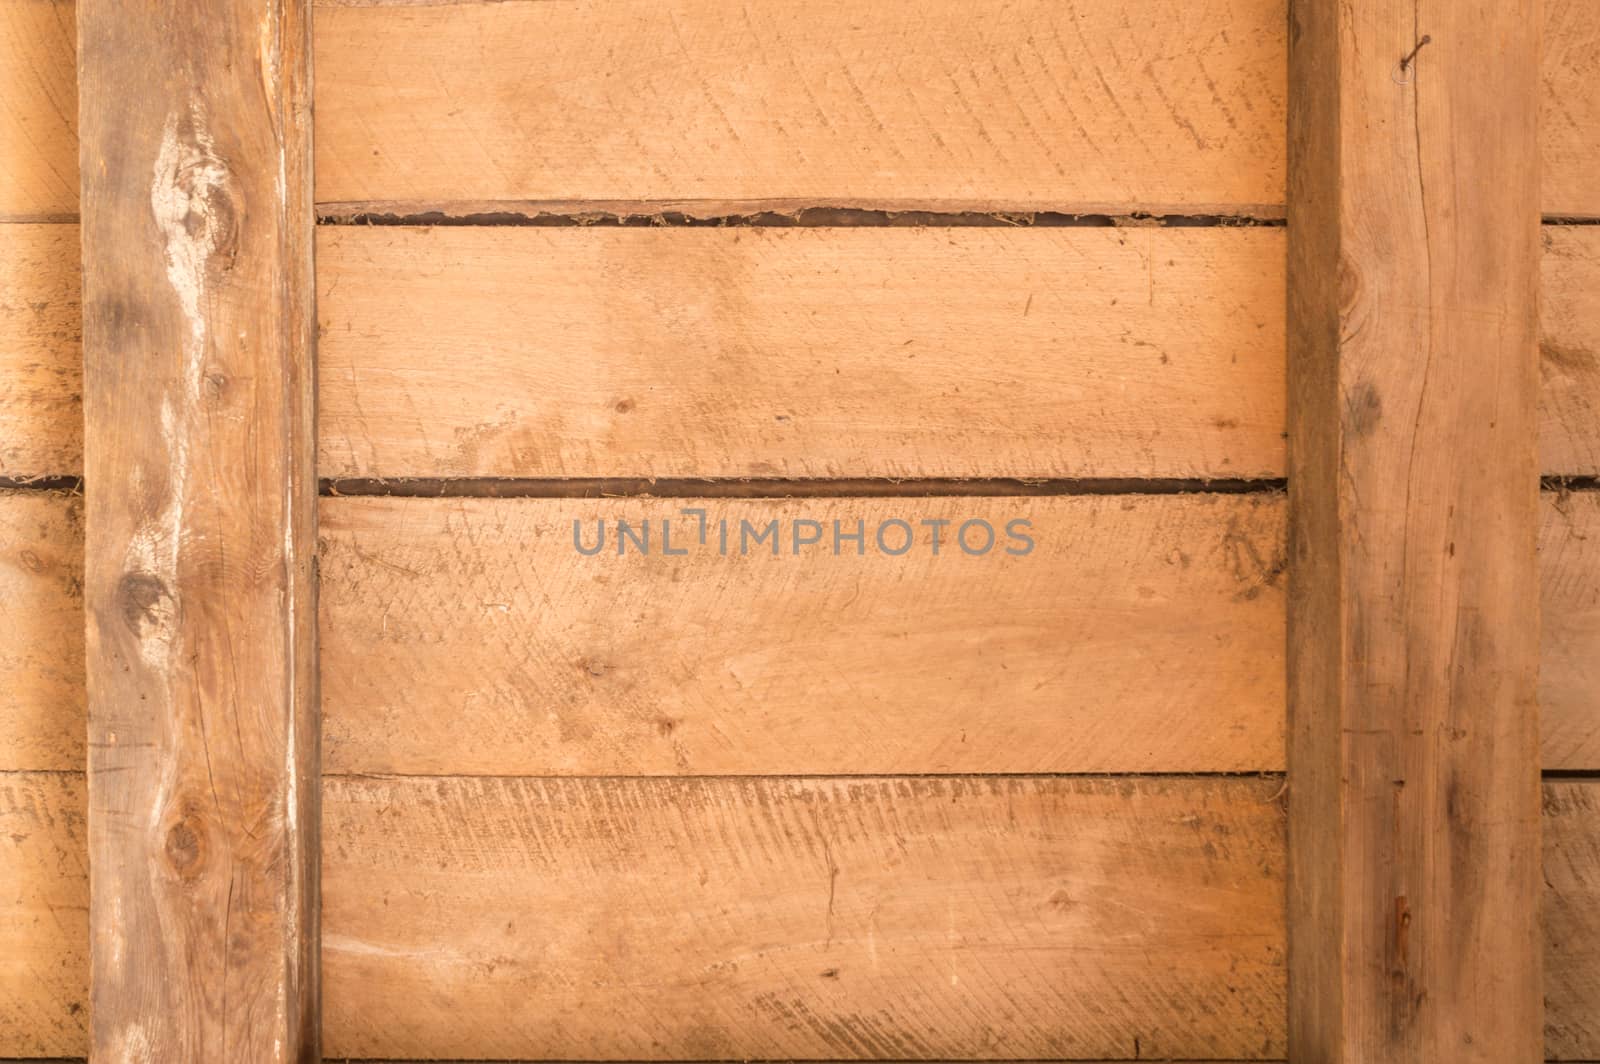 Wooden boards inside an old outbuilding with beams and horizontal arrangement